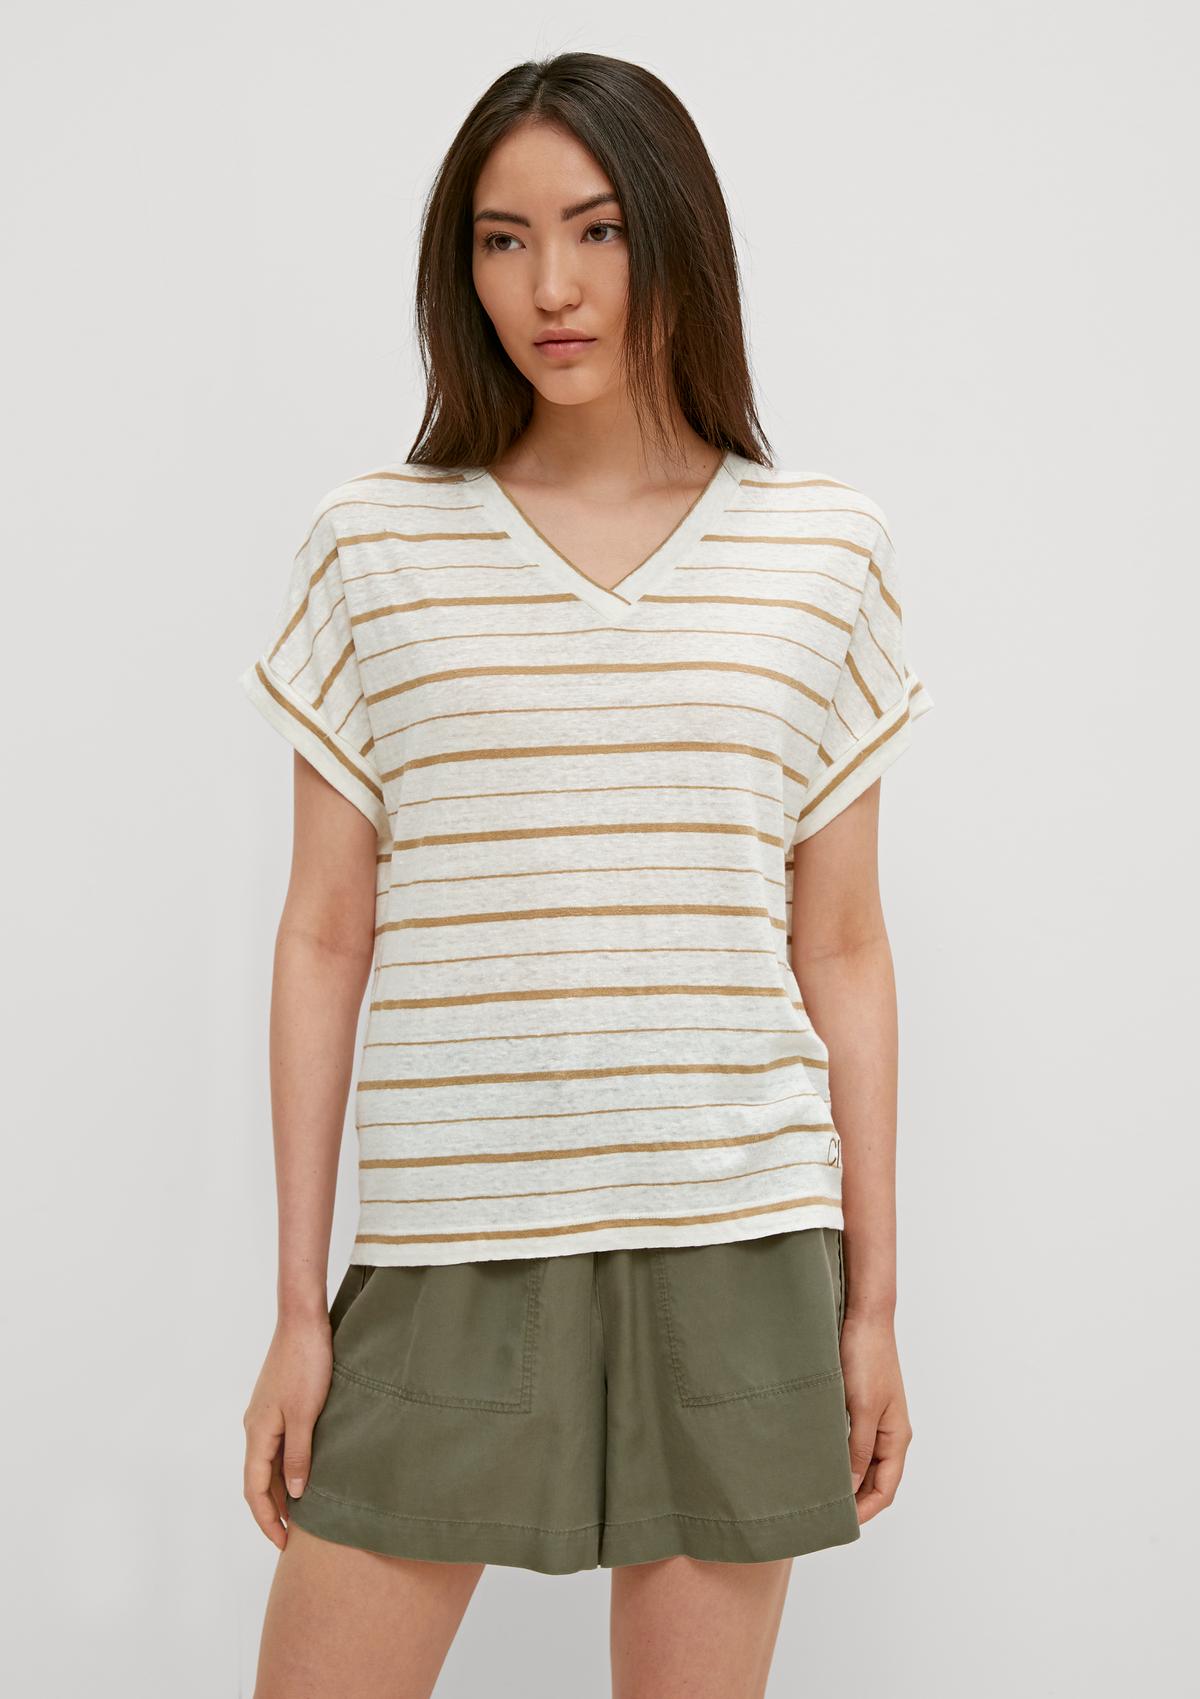 T-shirt with a stripe pattern